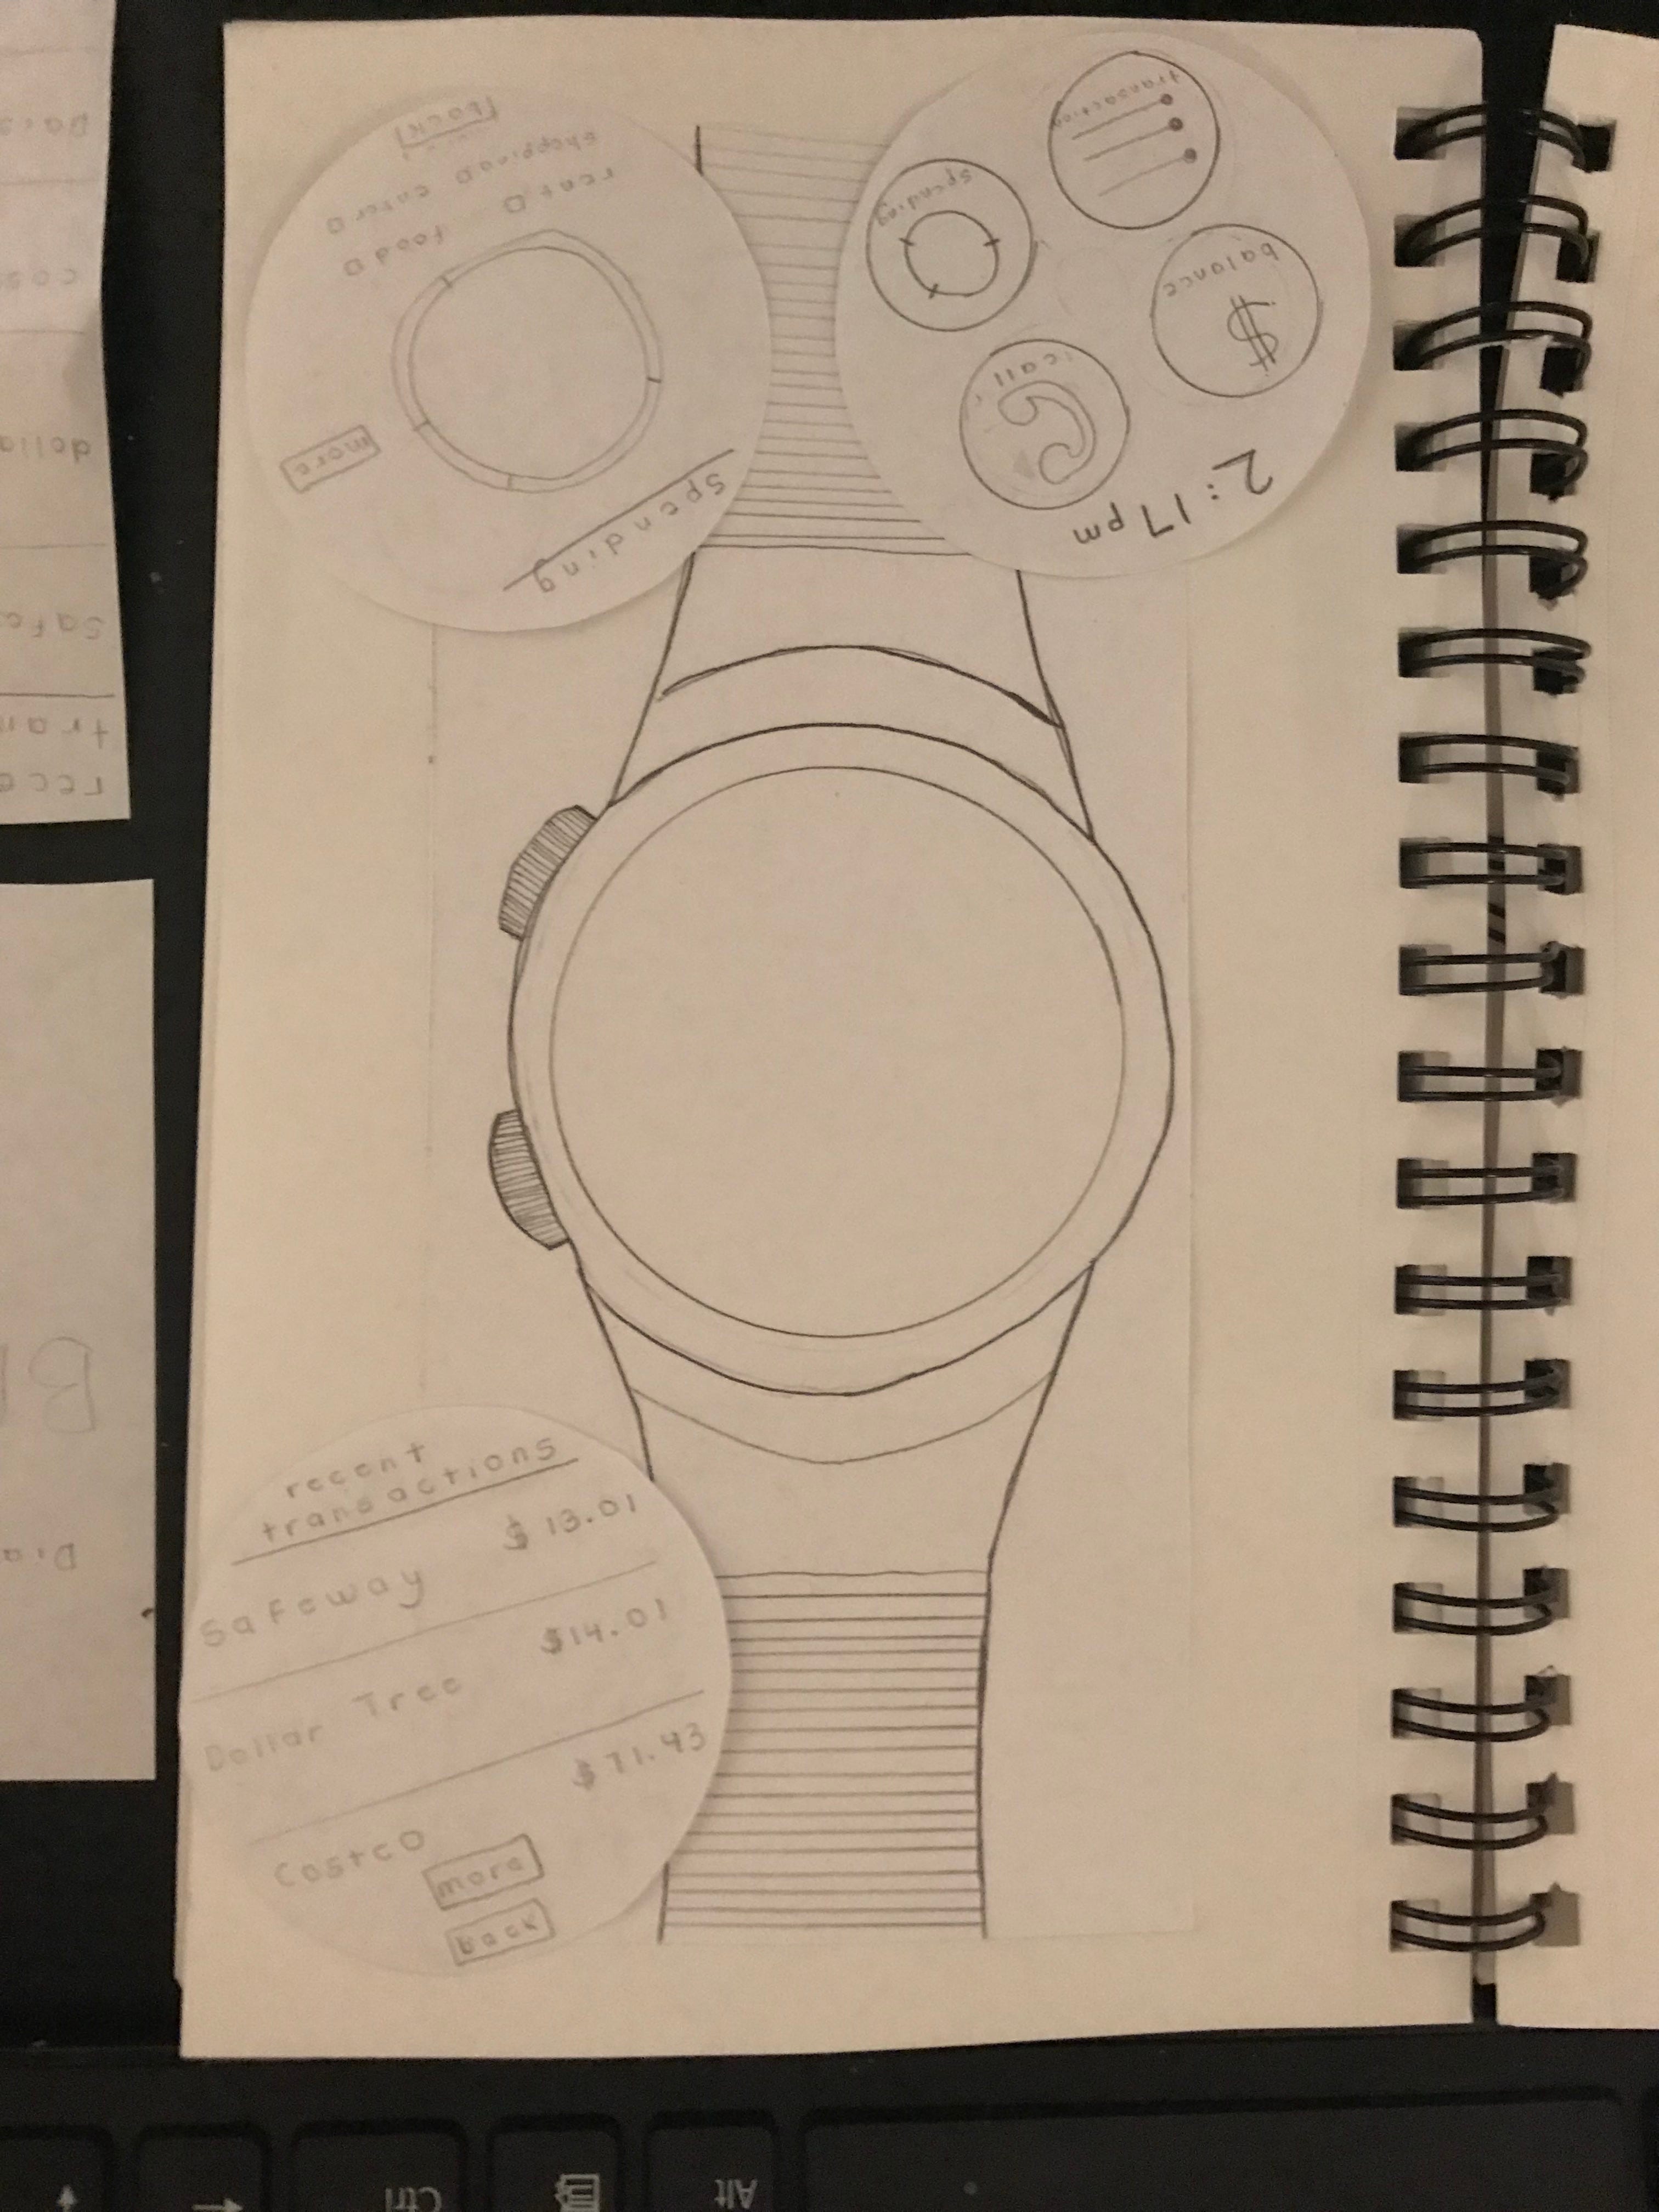 A Paper Prototype: Smart Watch & Mobile Banking | by Yodit Tefera | Medium